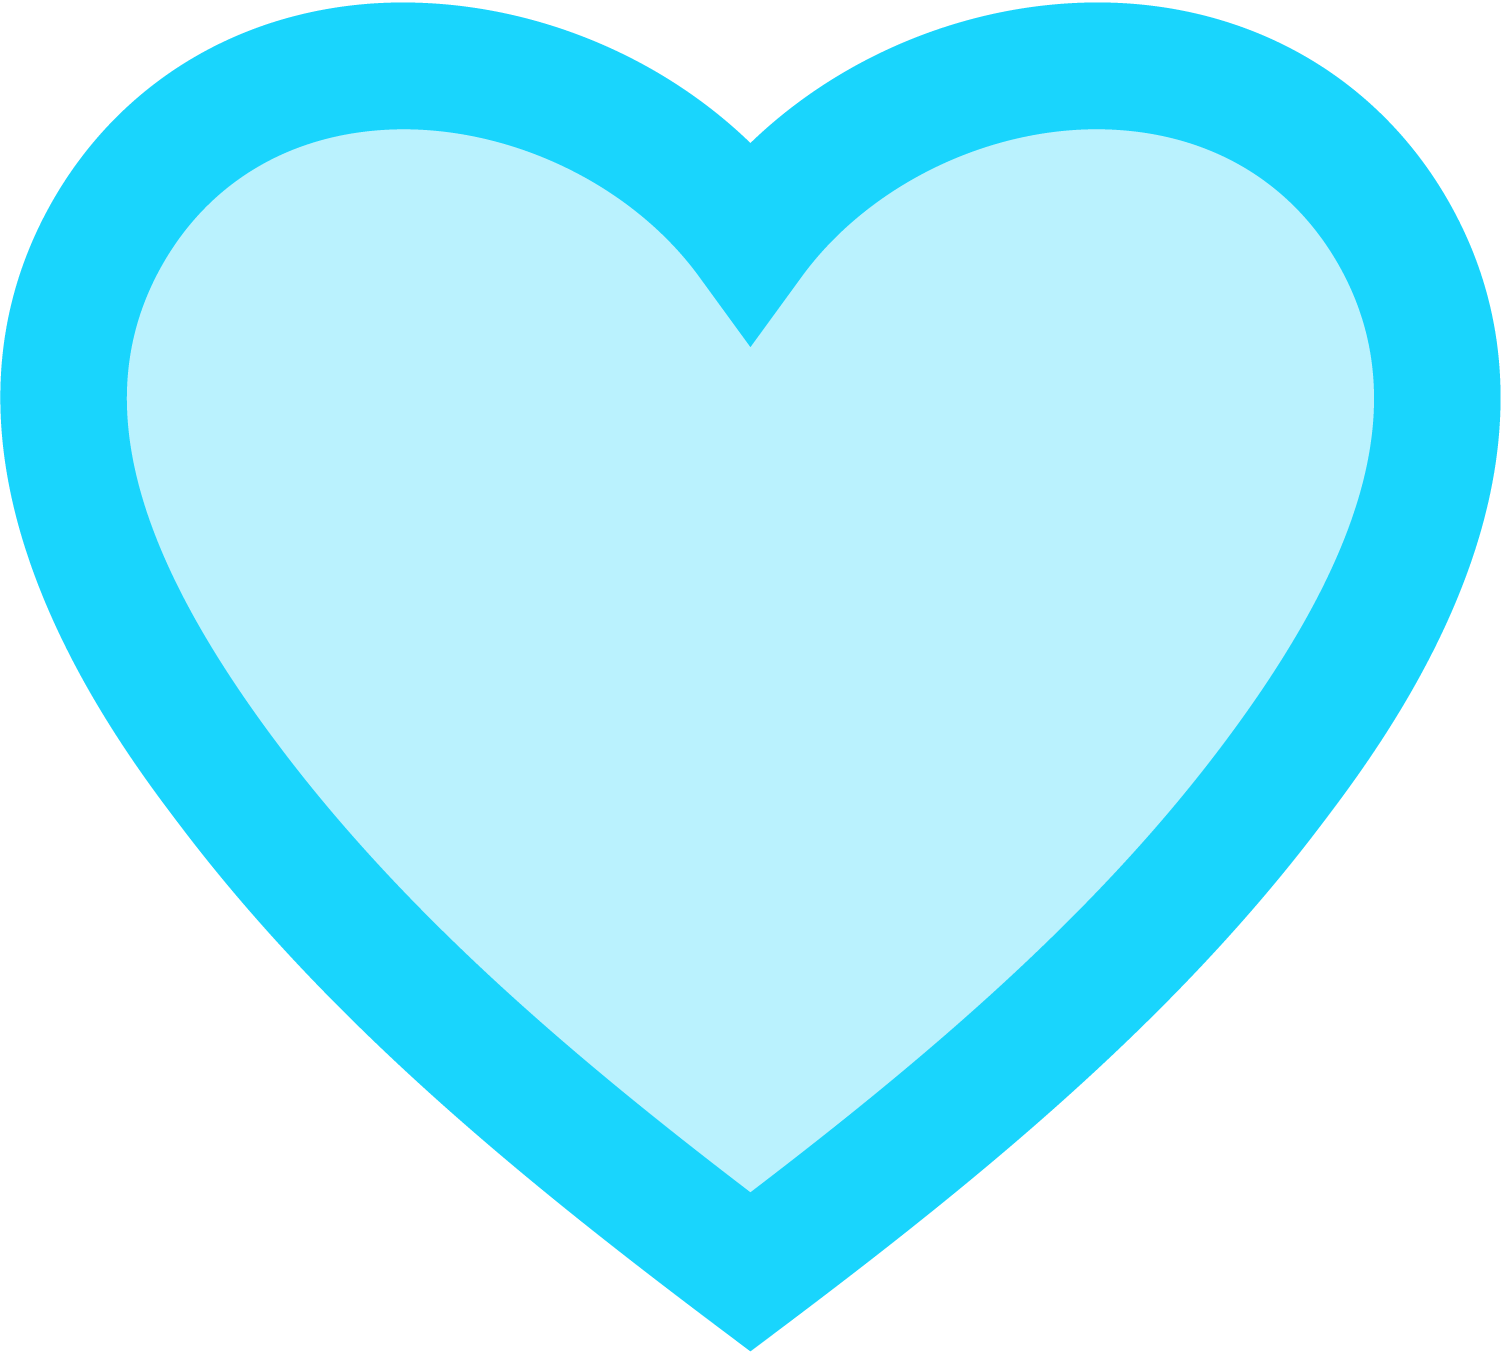 A simple heart shape outlined in bright blue with a lighter blue fill inside, reminiscent of Fibion designs.